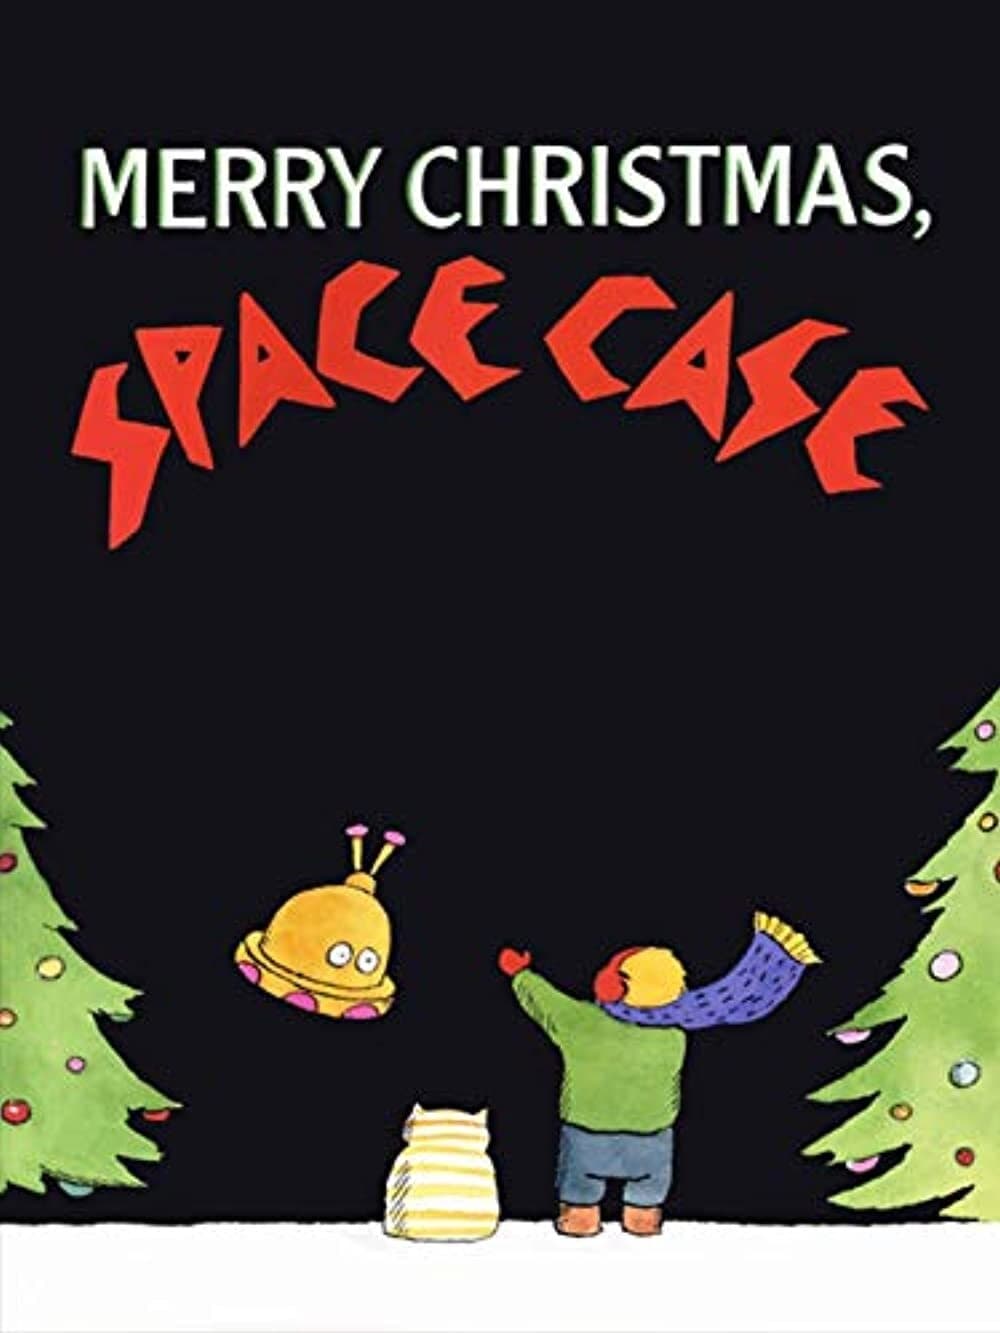 Merry Christmas Space Case (2003)